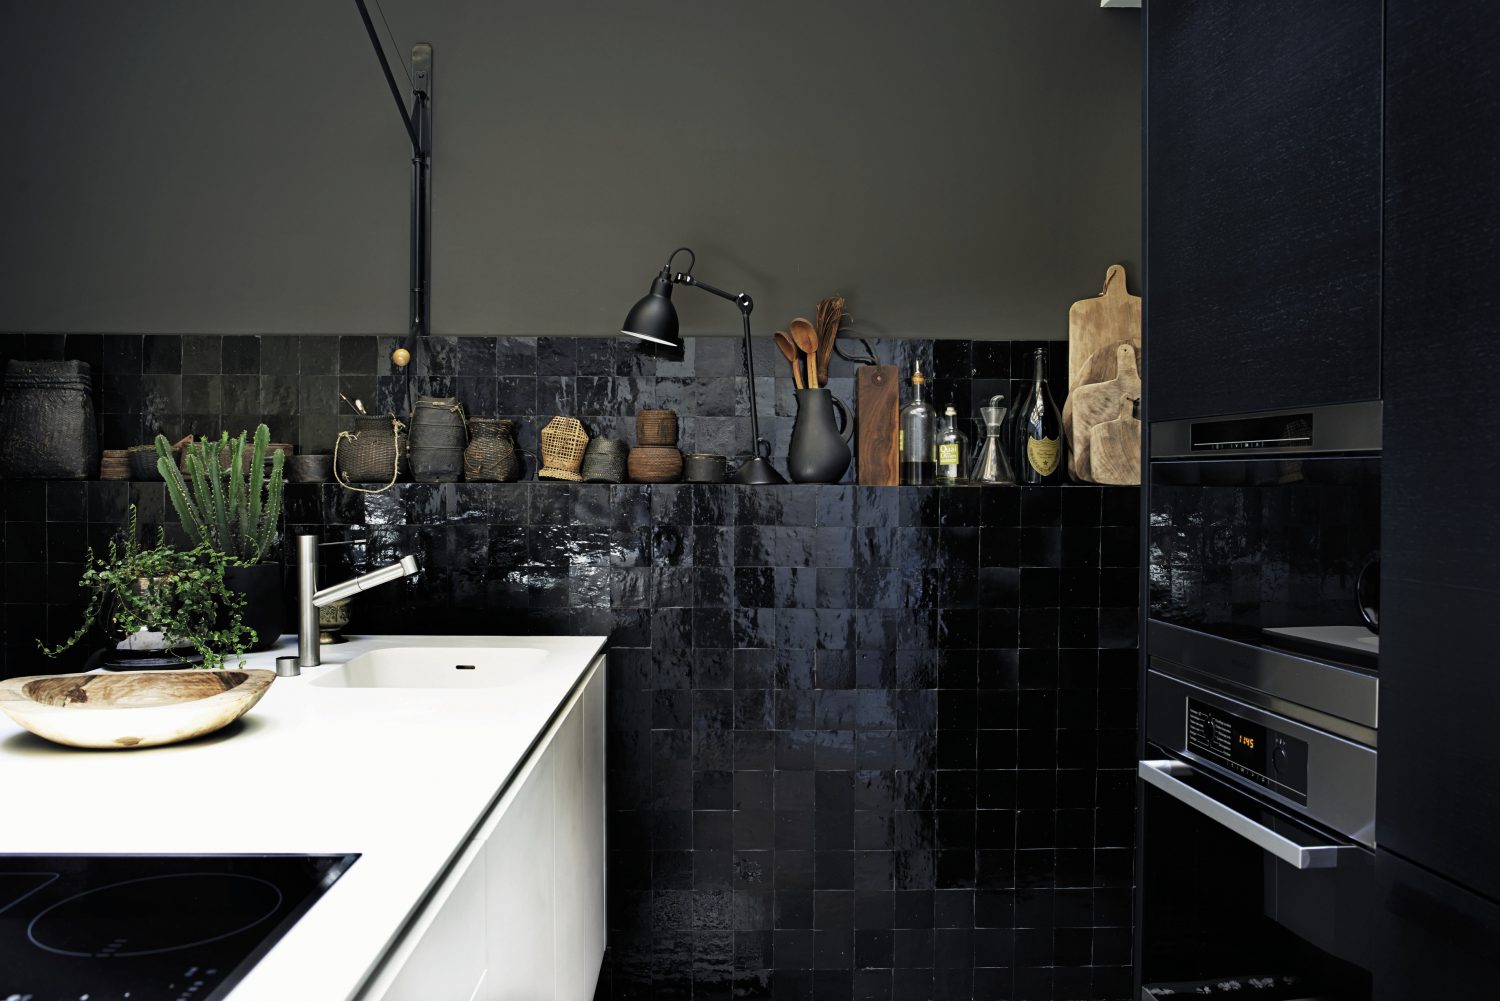 The black and white kitchen is lit by natural light from an atrium, so despite the glossy black tiles and bitter chocolate walls, the space is bright. A white island conceals storage and houses a sink and hob/stovetop. The part-tiled wall is built out enough to include a shallow shelf for utensils, chopping boards, bottles of olive oil, African baskets and a black Anglepoise lamp.